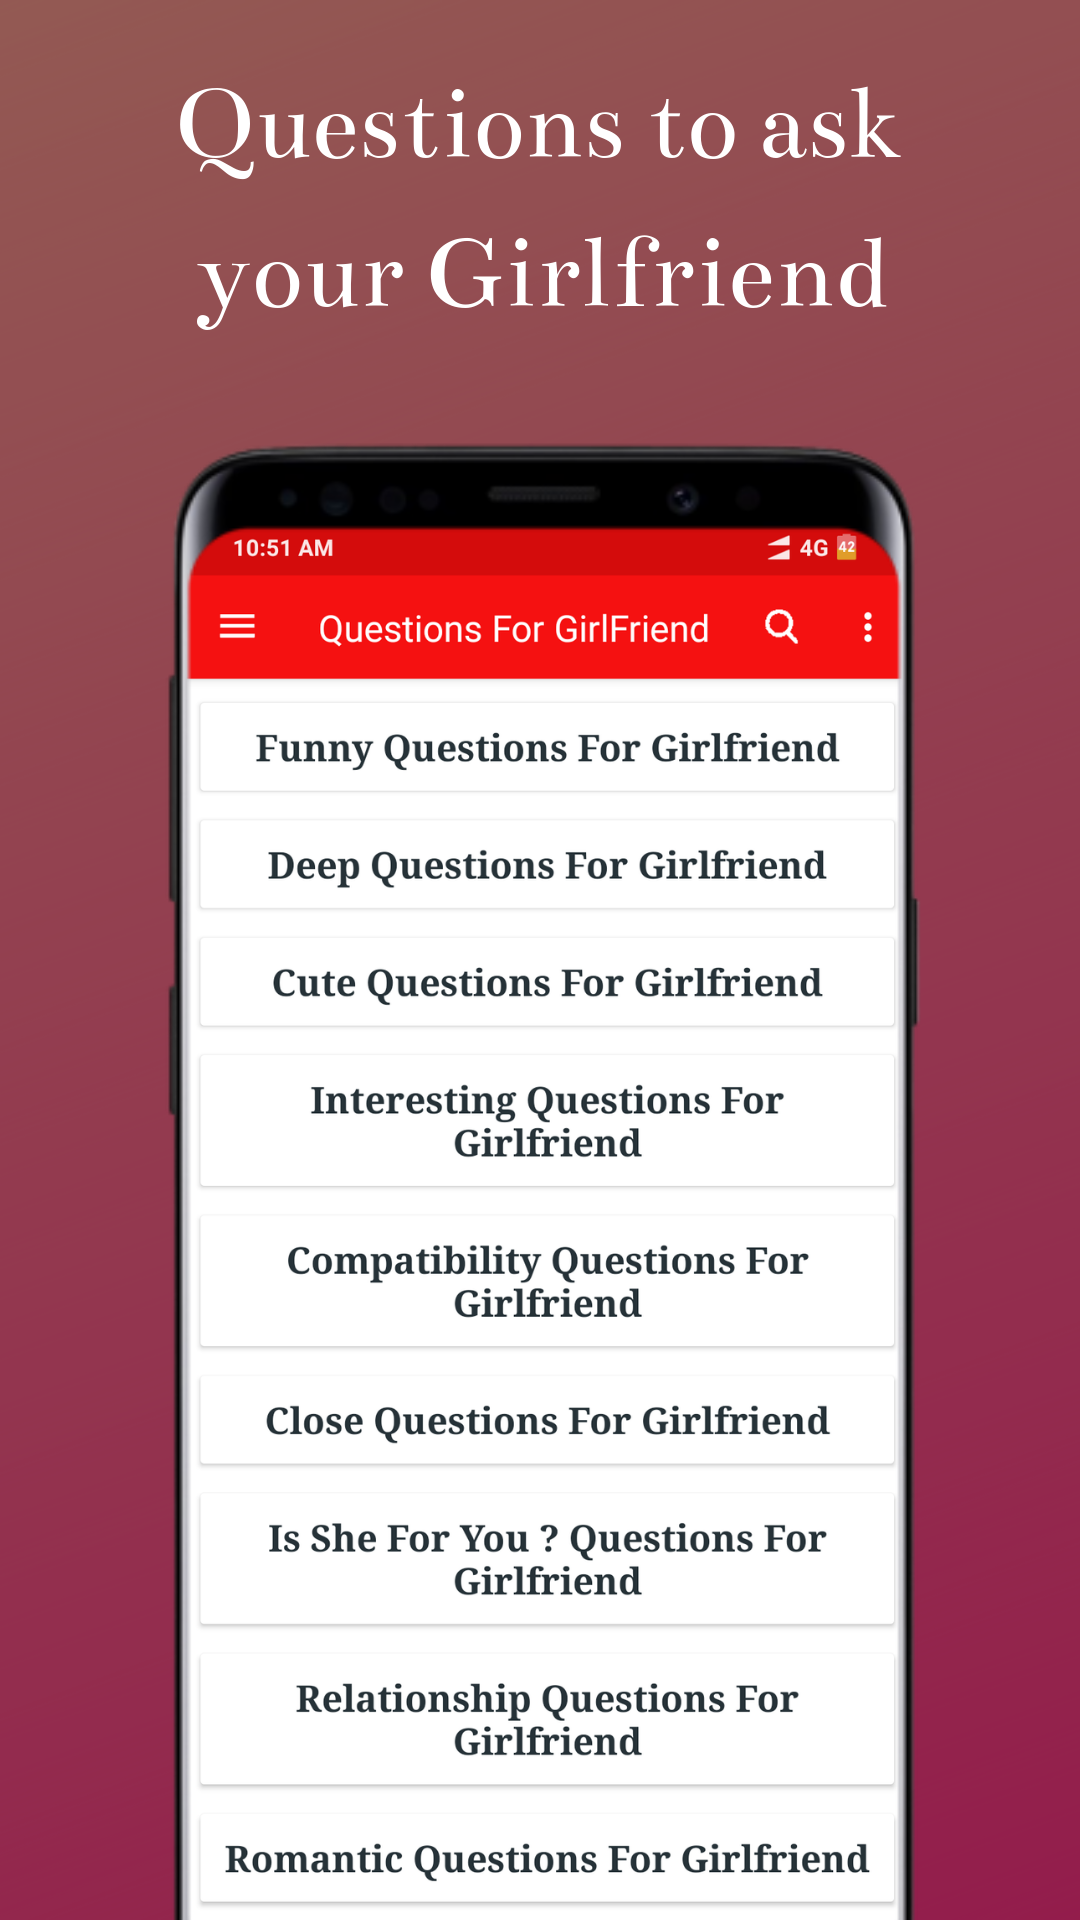 Questions to ask a girl, Boy, Gf, Bf, Couple- LUVY APK  for Android –  Download Questions to ask a girl, Boy, Gf, Bf, Couple- LUVY APK Latest  Version from 